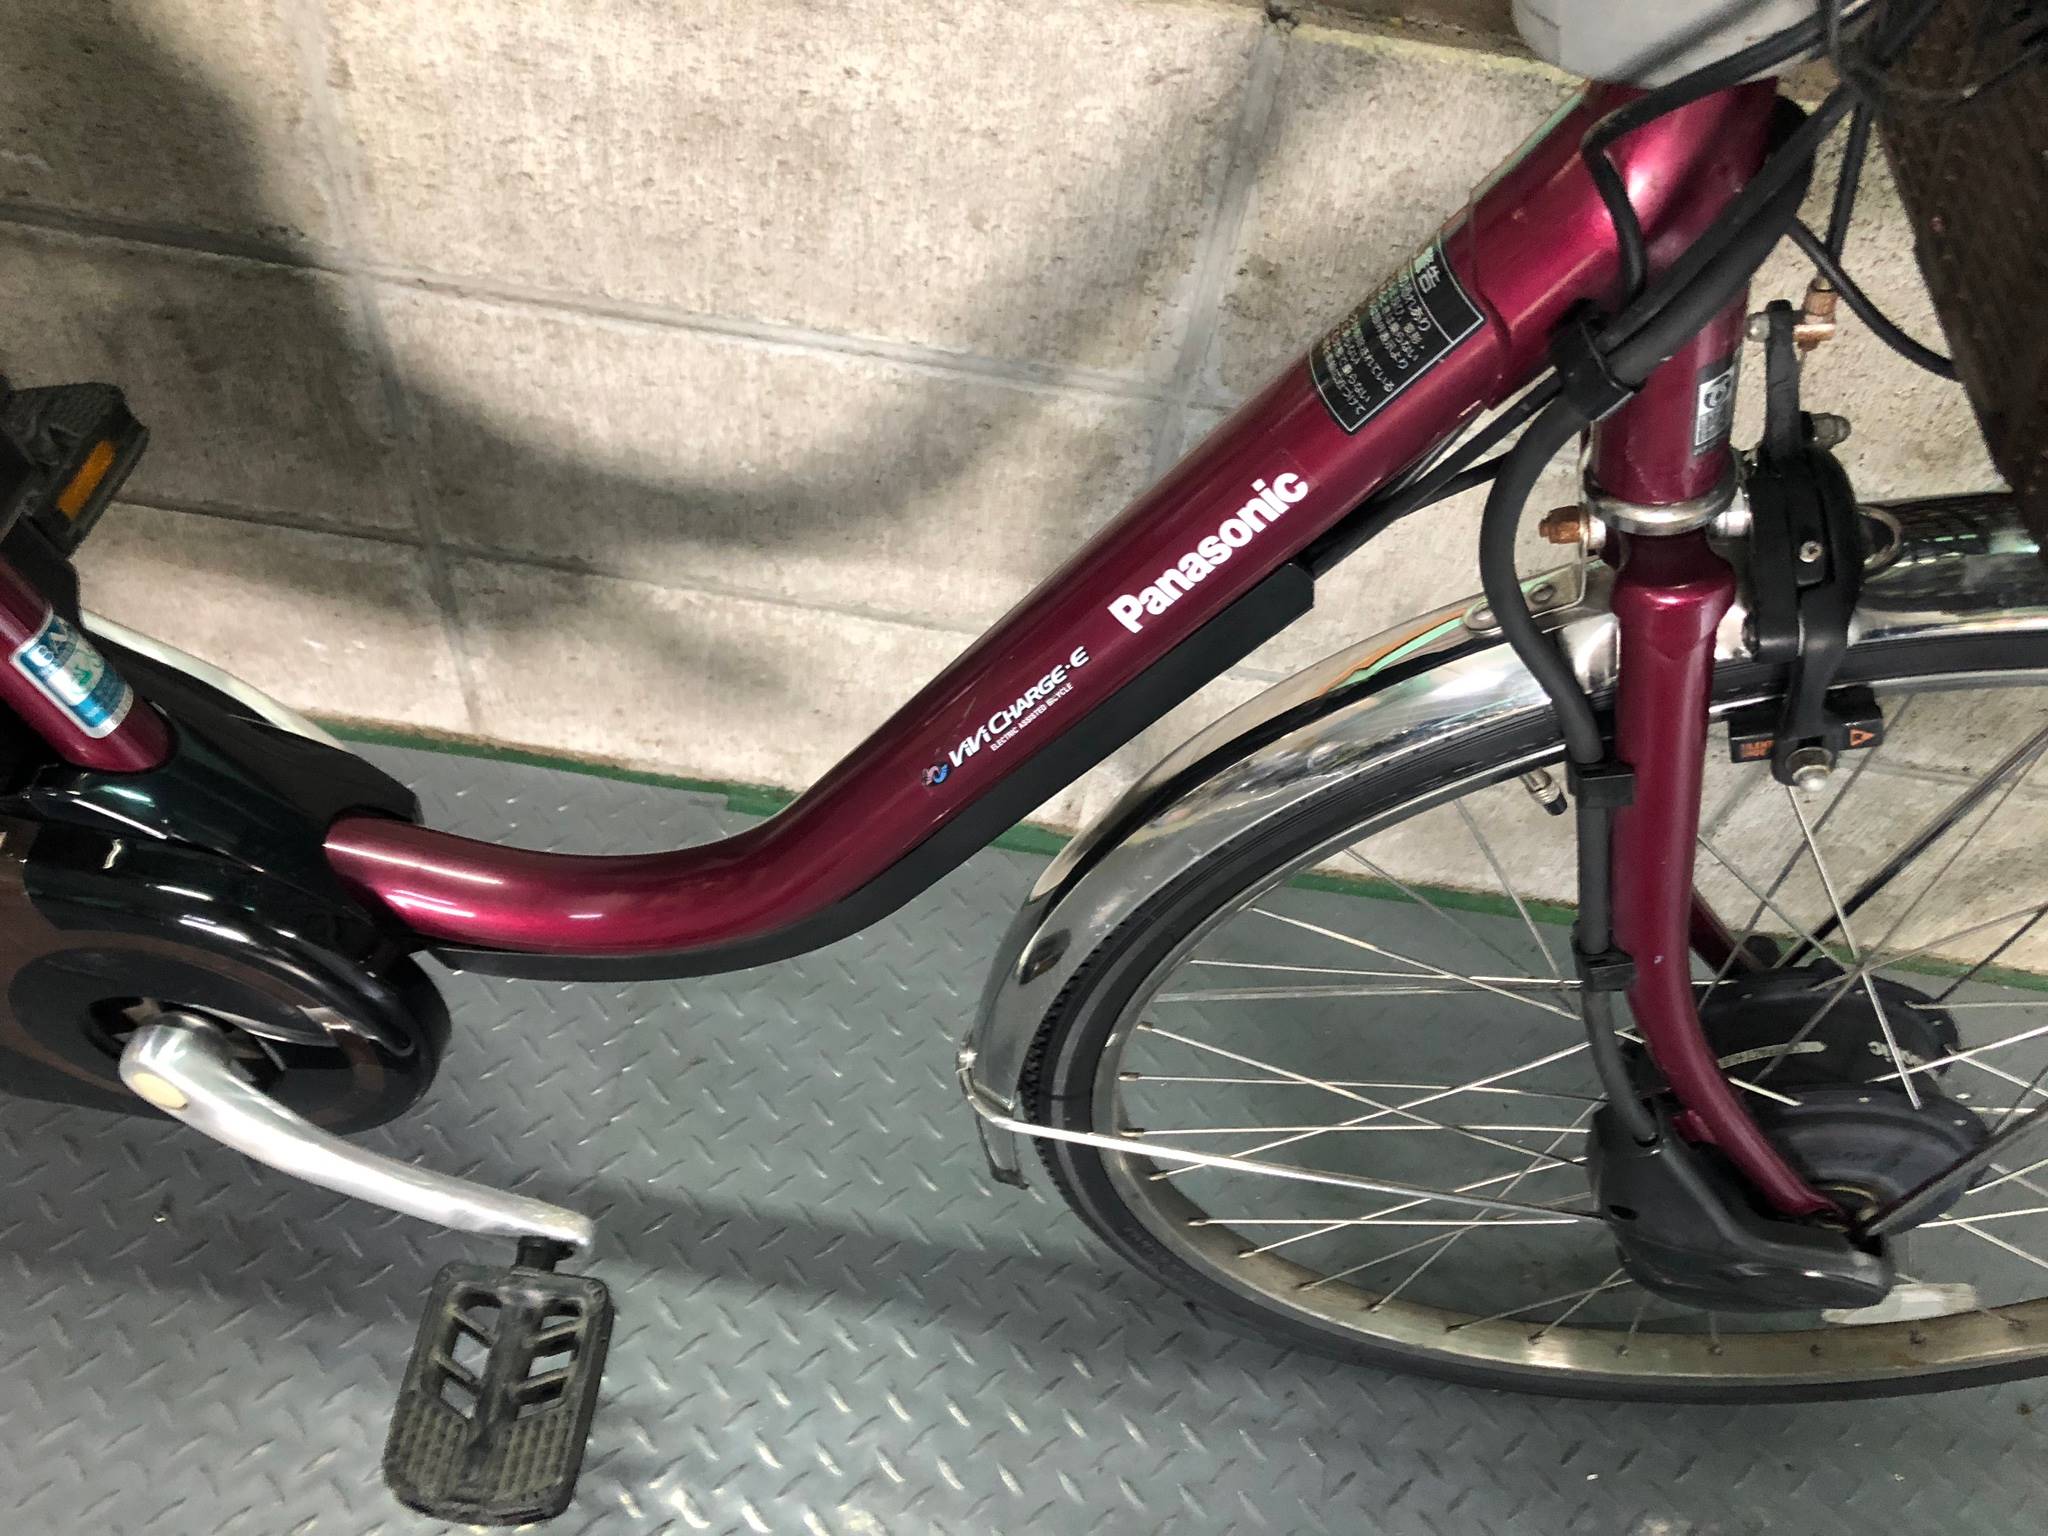 SOLD OUT】電動自転車 パナソニック ビビチャージ ワインレッド 26 